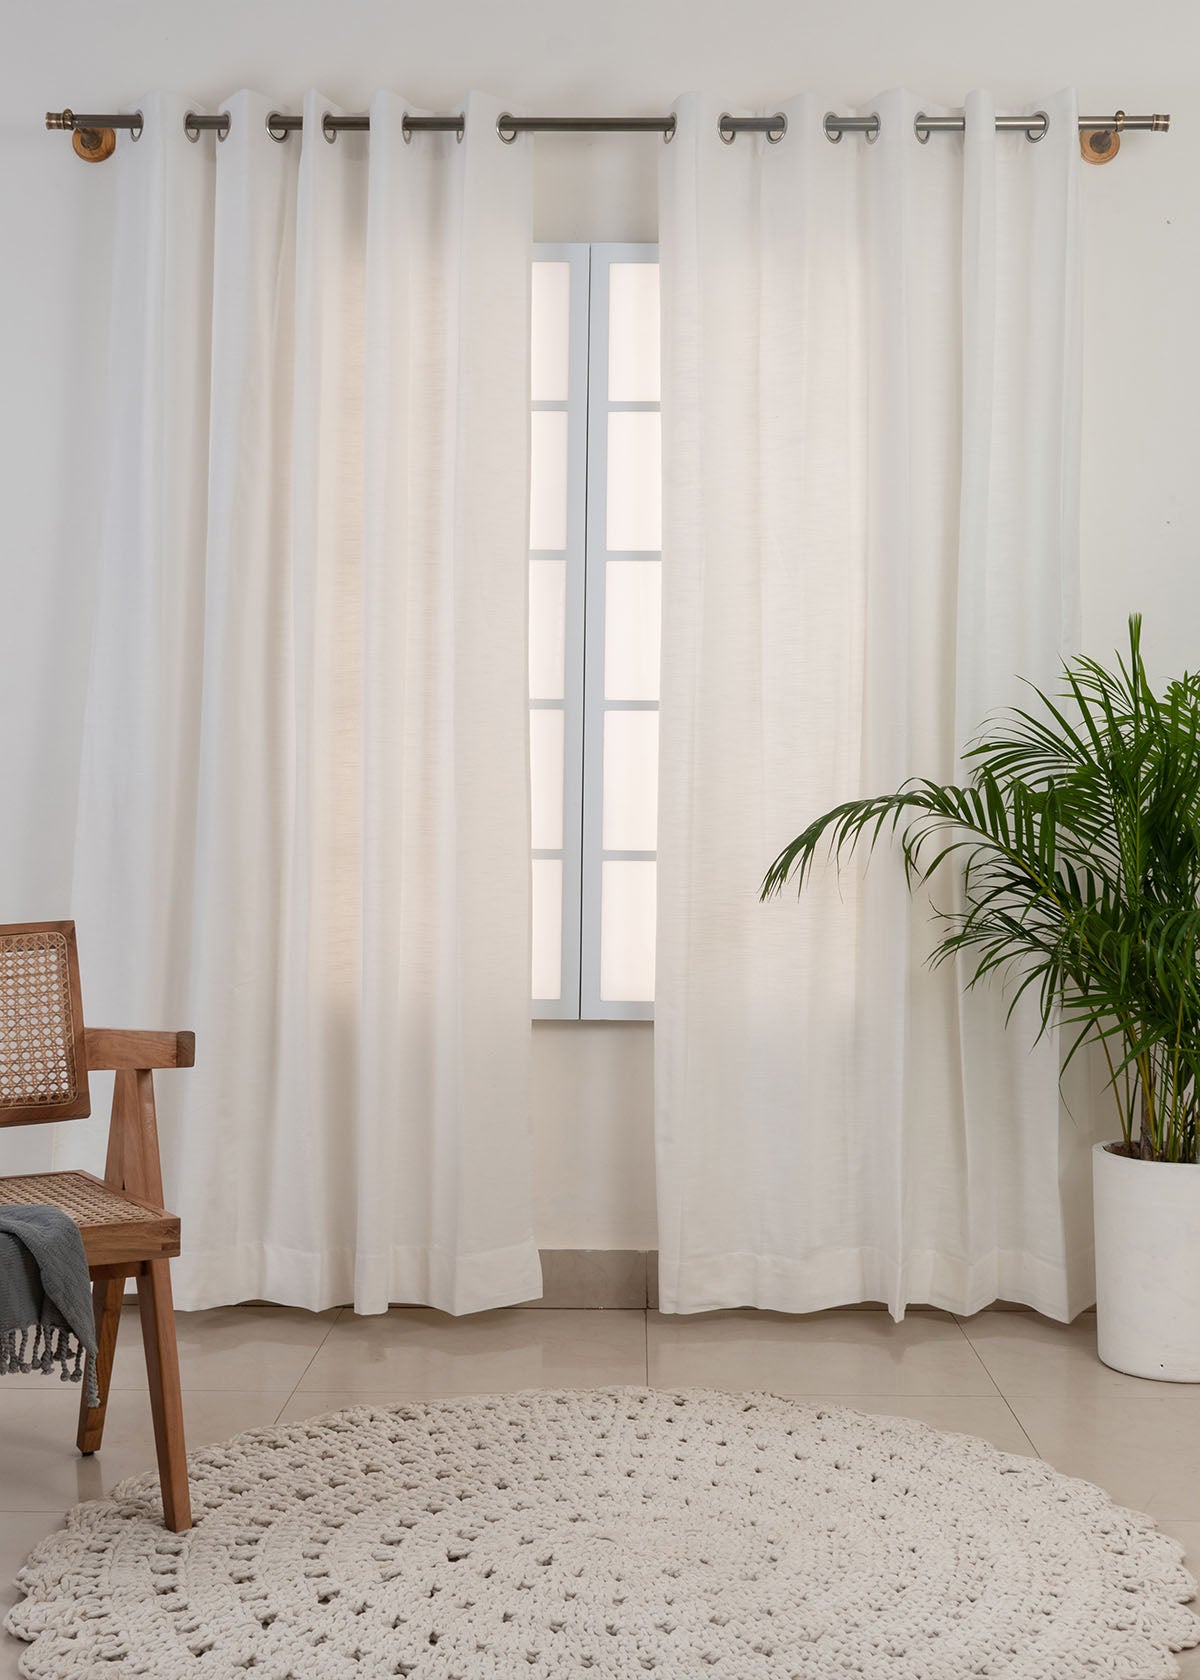 Solid white 100% Customizable Cotton plain curtain for bedroom - Room darkening